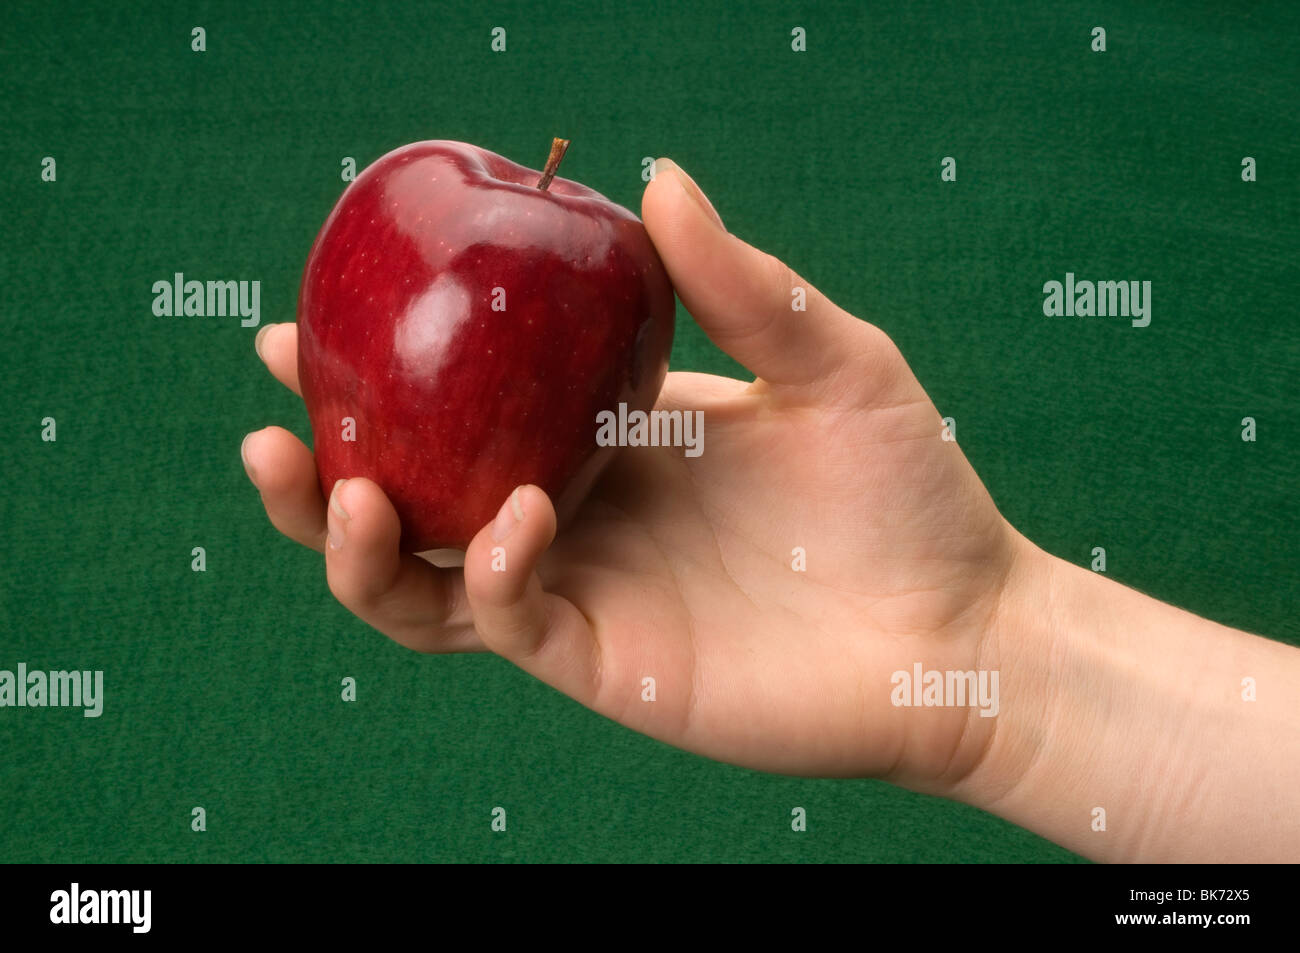 Hand holding Red Apple Banque D'Images